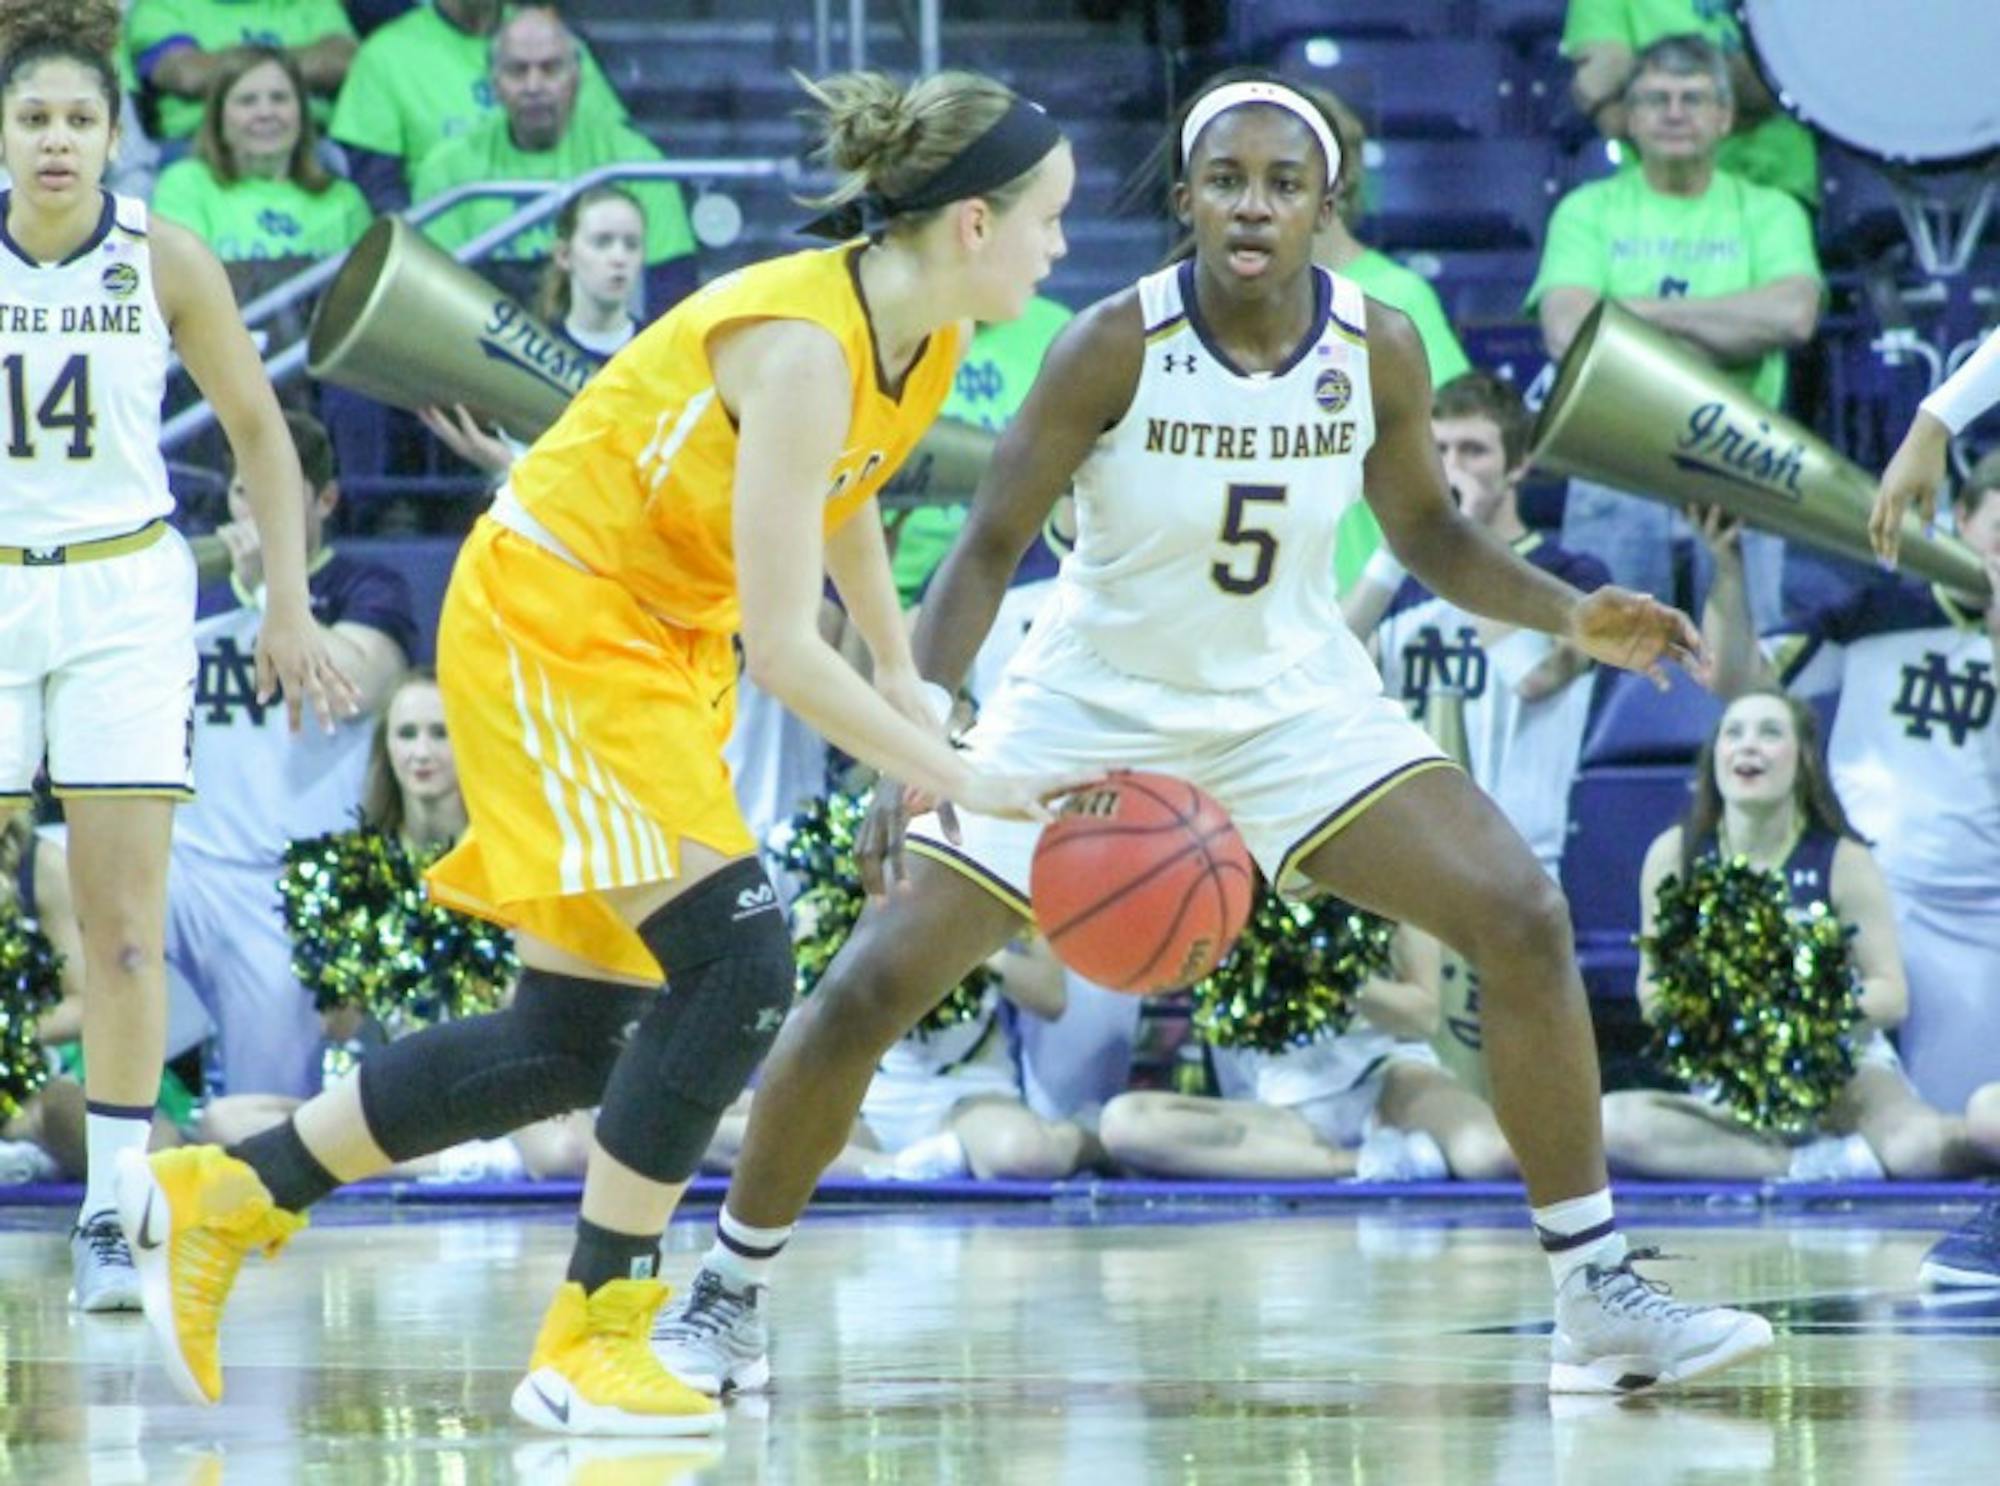 Irish freshman guard Jackie Young defends the opposing ballhandler during Notre Dame’s 114-54 win over Valparaiso on Sunday at Purcell Pavilion. Young led the Irish in points and steals in the victory.